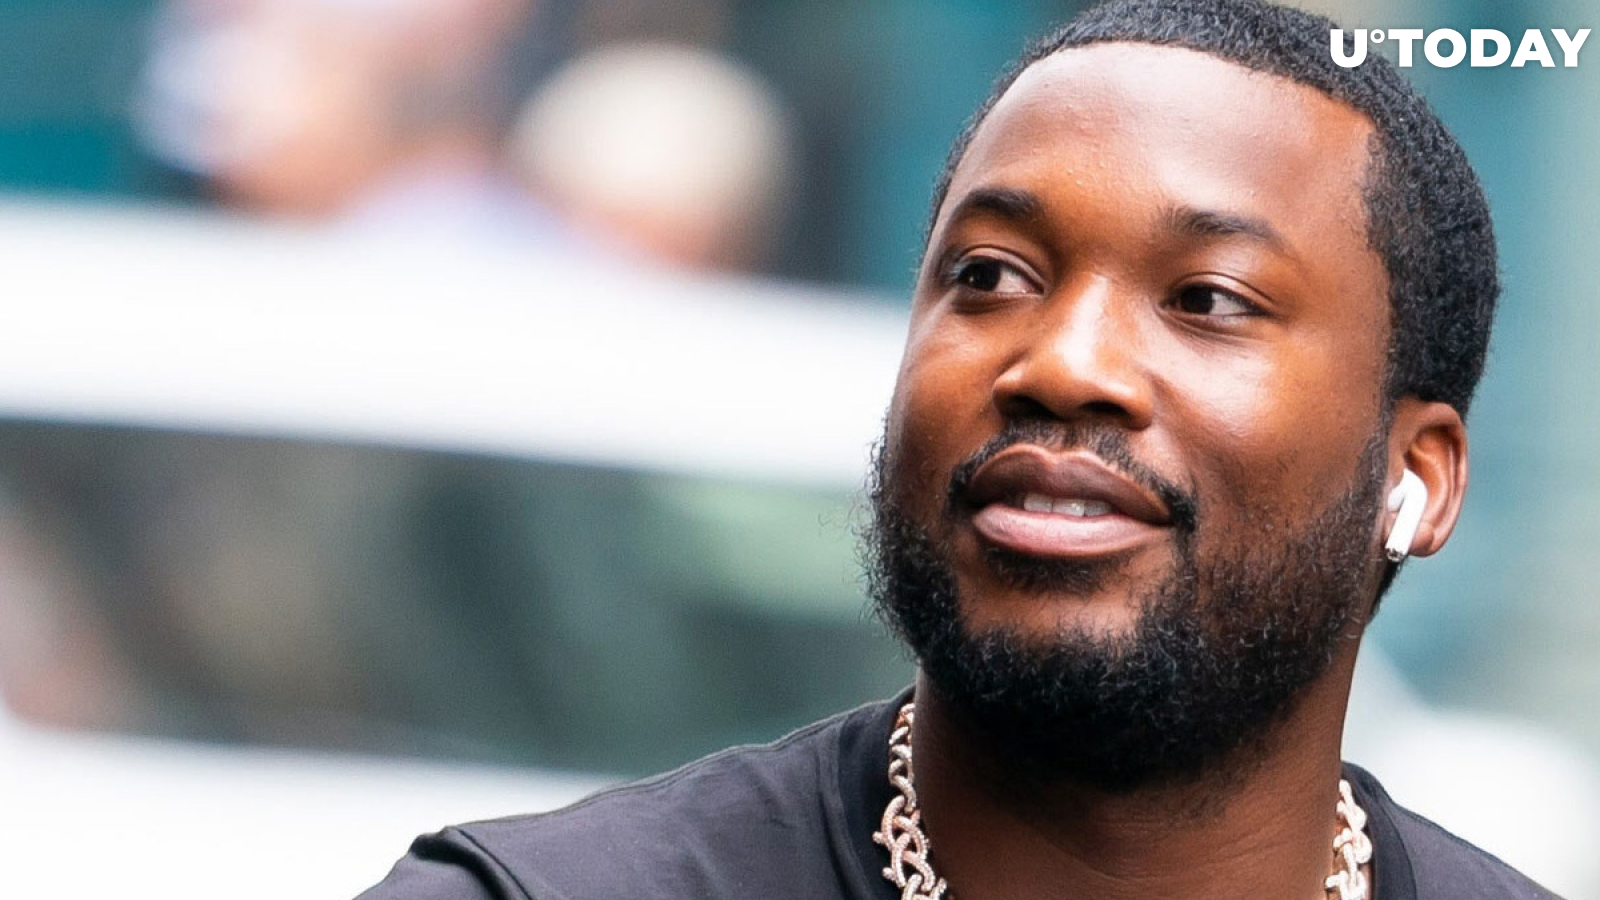 US Rapper Meek Mill Attracted by Shiba-Inu Coins after Grabbing DOGE and Bitcoin